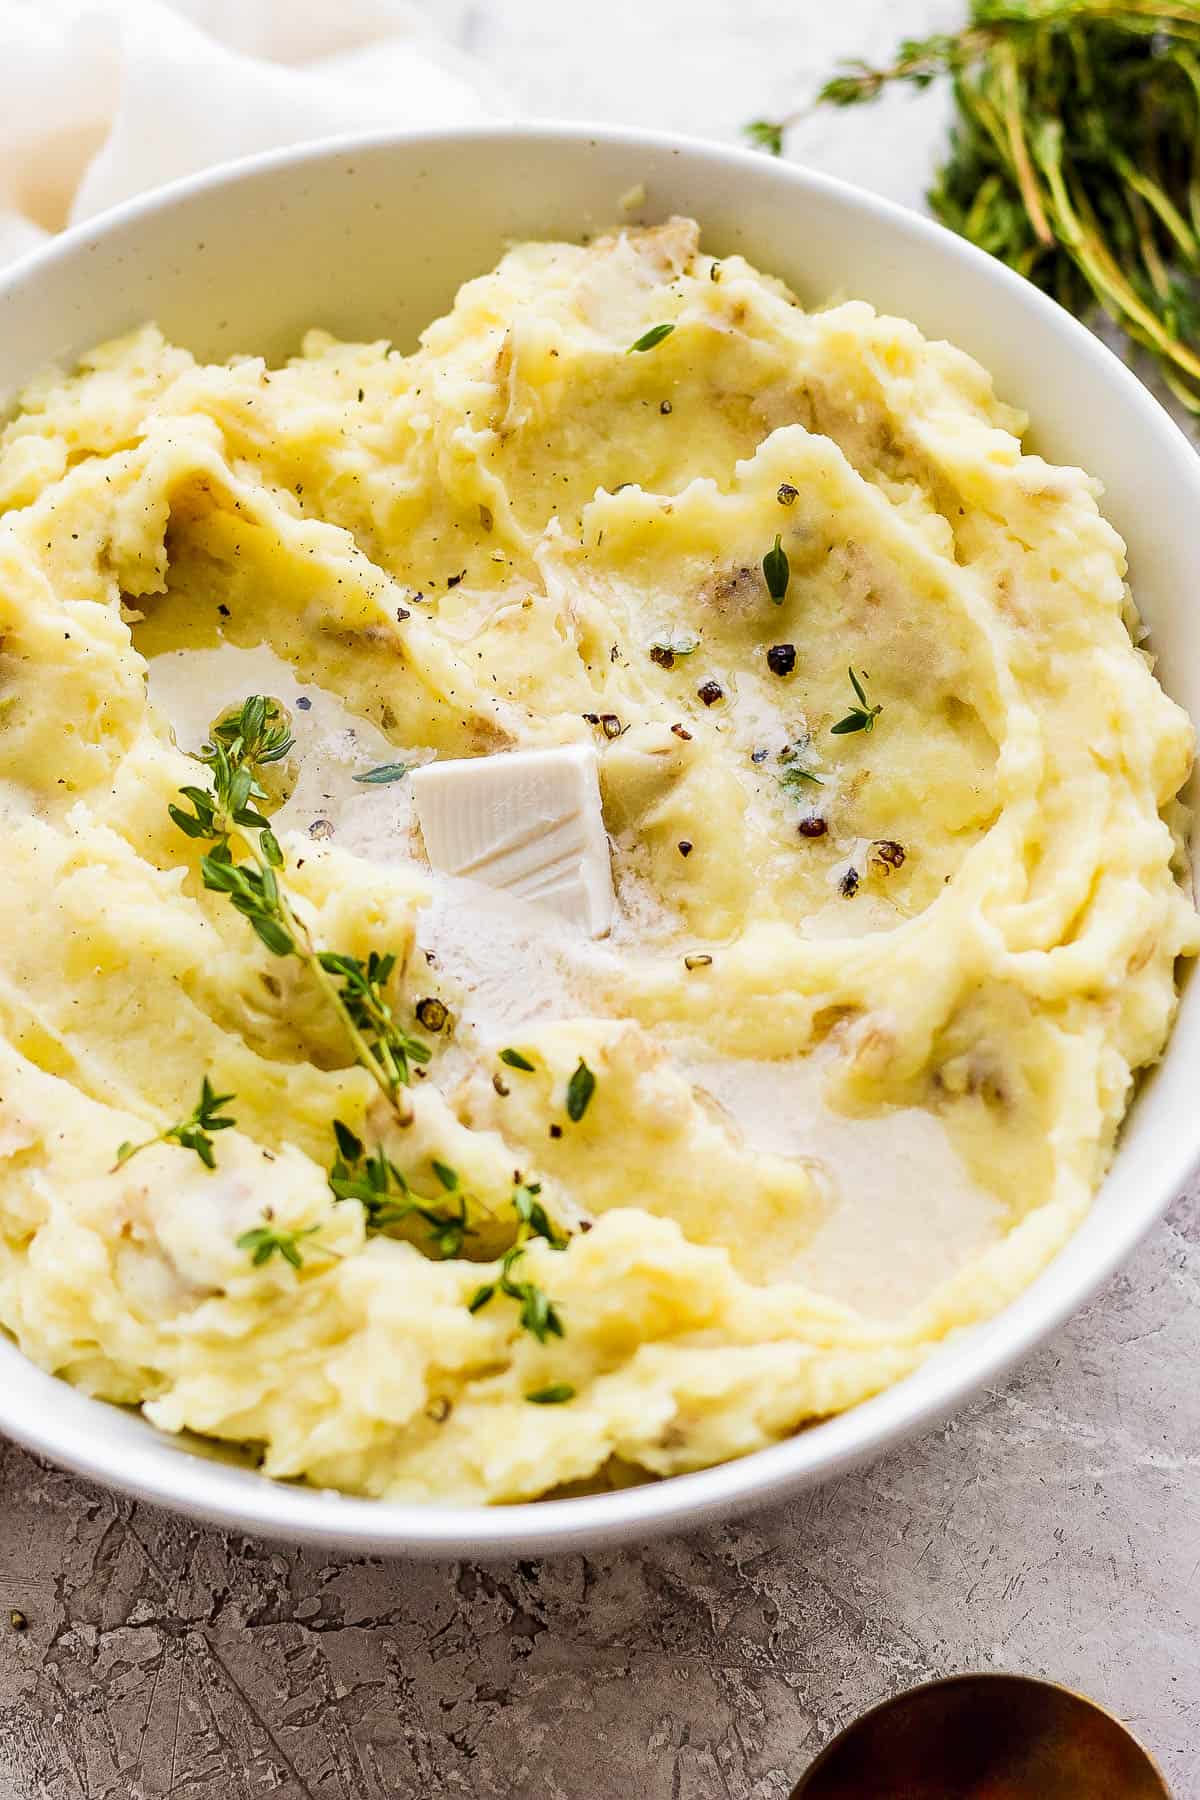 Dairy-free mashed potatoes in a bowl.